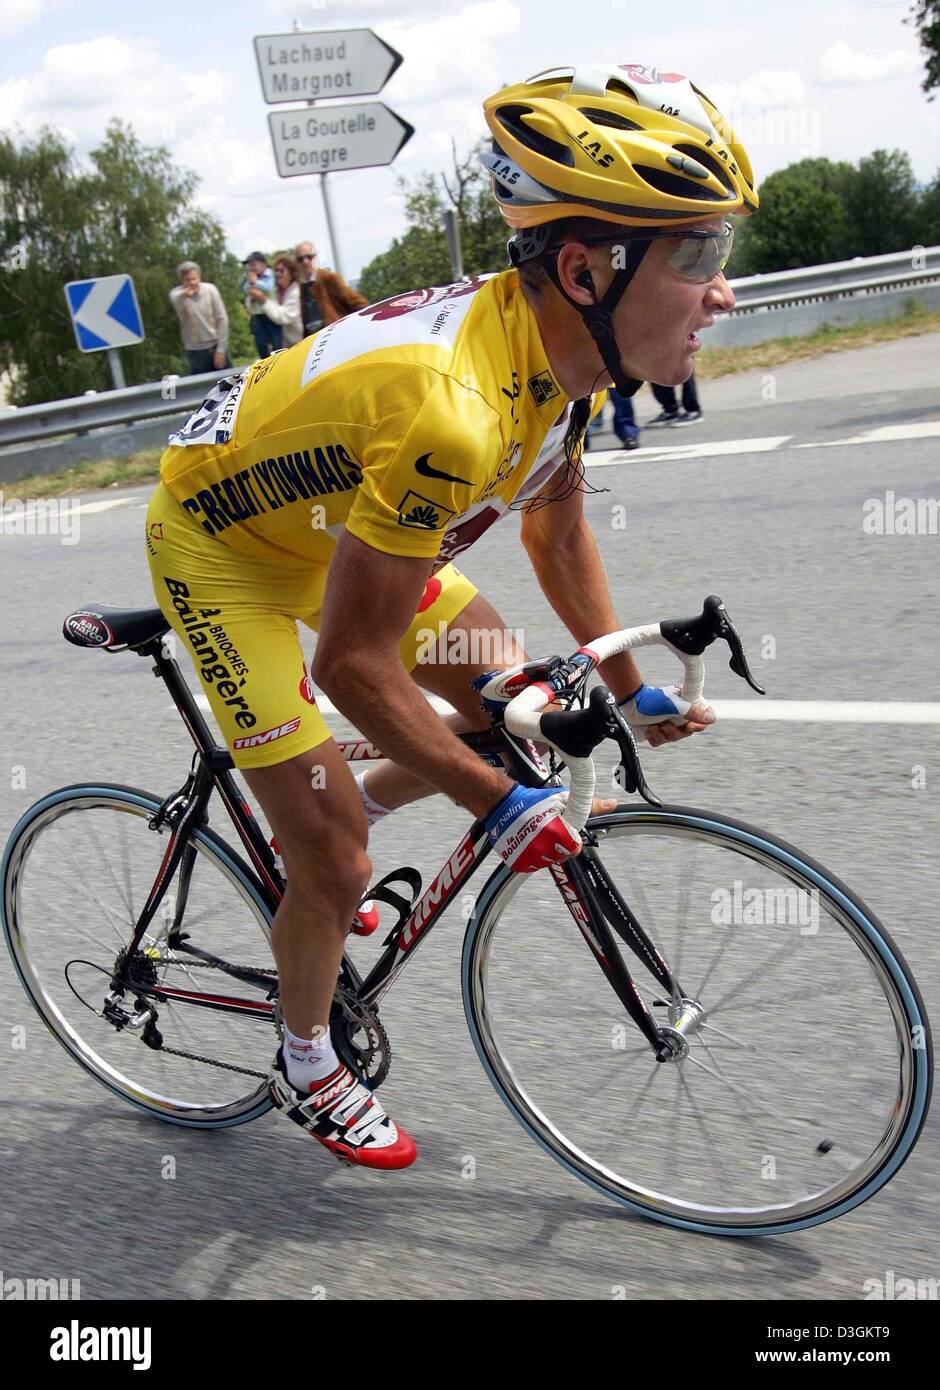 (dpa) - 25-year-old French cyclist Thomas Voeckler of team Brioches La Boulangere wears the race leader's yellow jersey during the ninth stage of the Tour de France cycling race in France, 13 July 2004. The 160.5km long stage took the cyclists from Saint-Leonard-de-Noblat to Gueret. During the 10th stage Voeckler wears the yellow jersey for the fifth consecutive day. Stock Photo